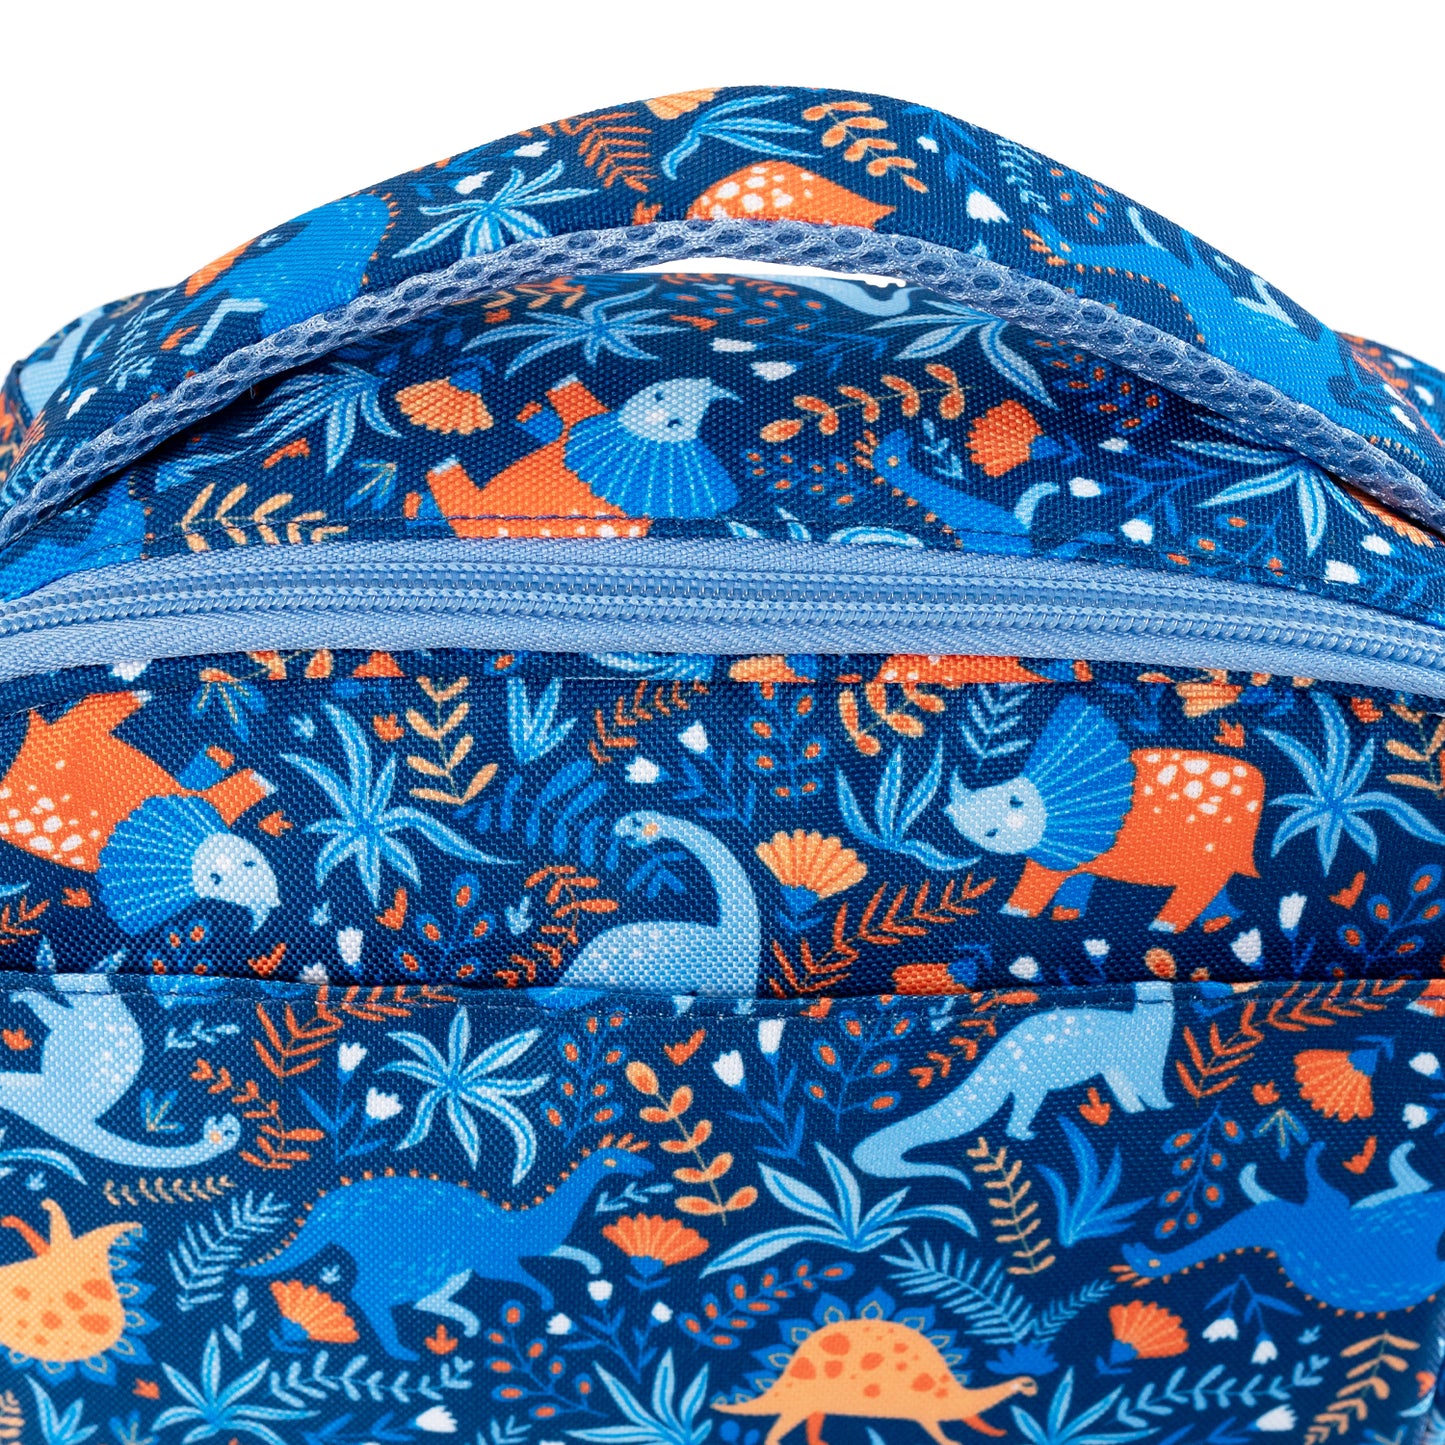 Out & About Dinosaur Lunch Bag